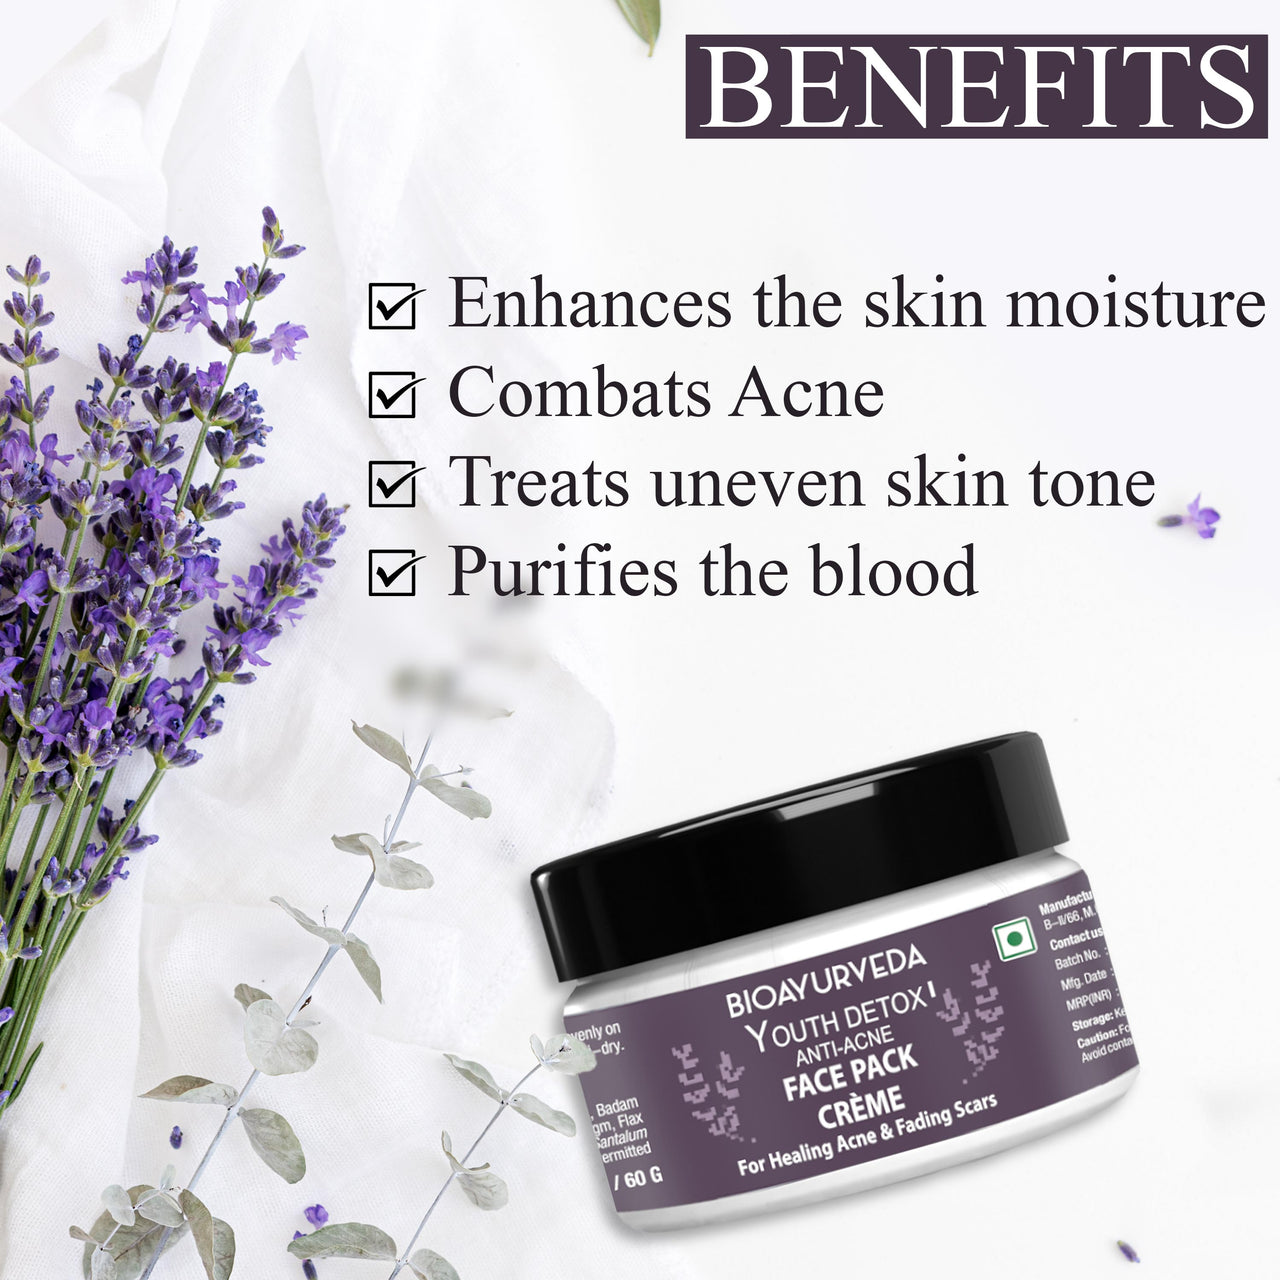 Youth Detox Anti-Acne Face Pack Cream Benefits